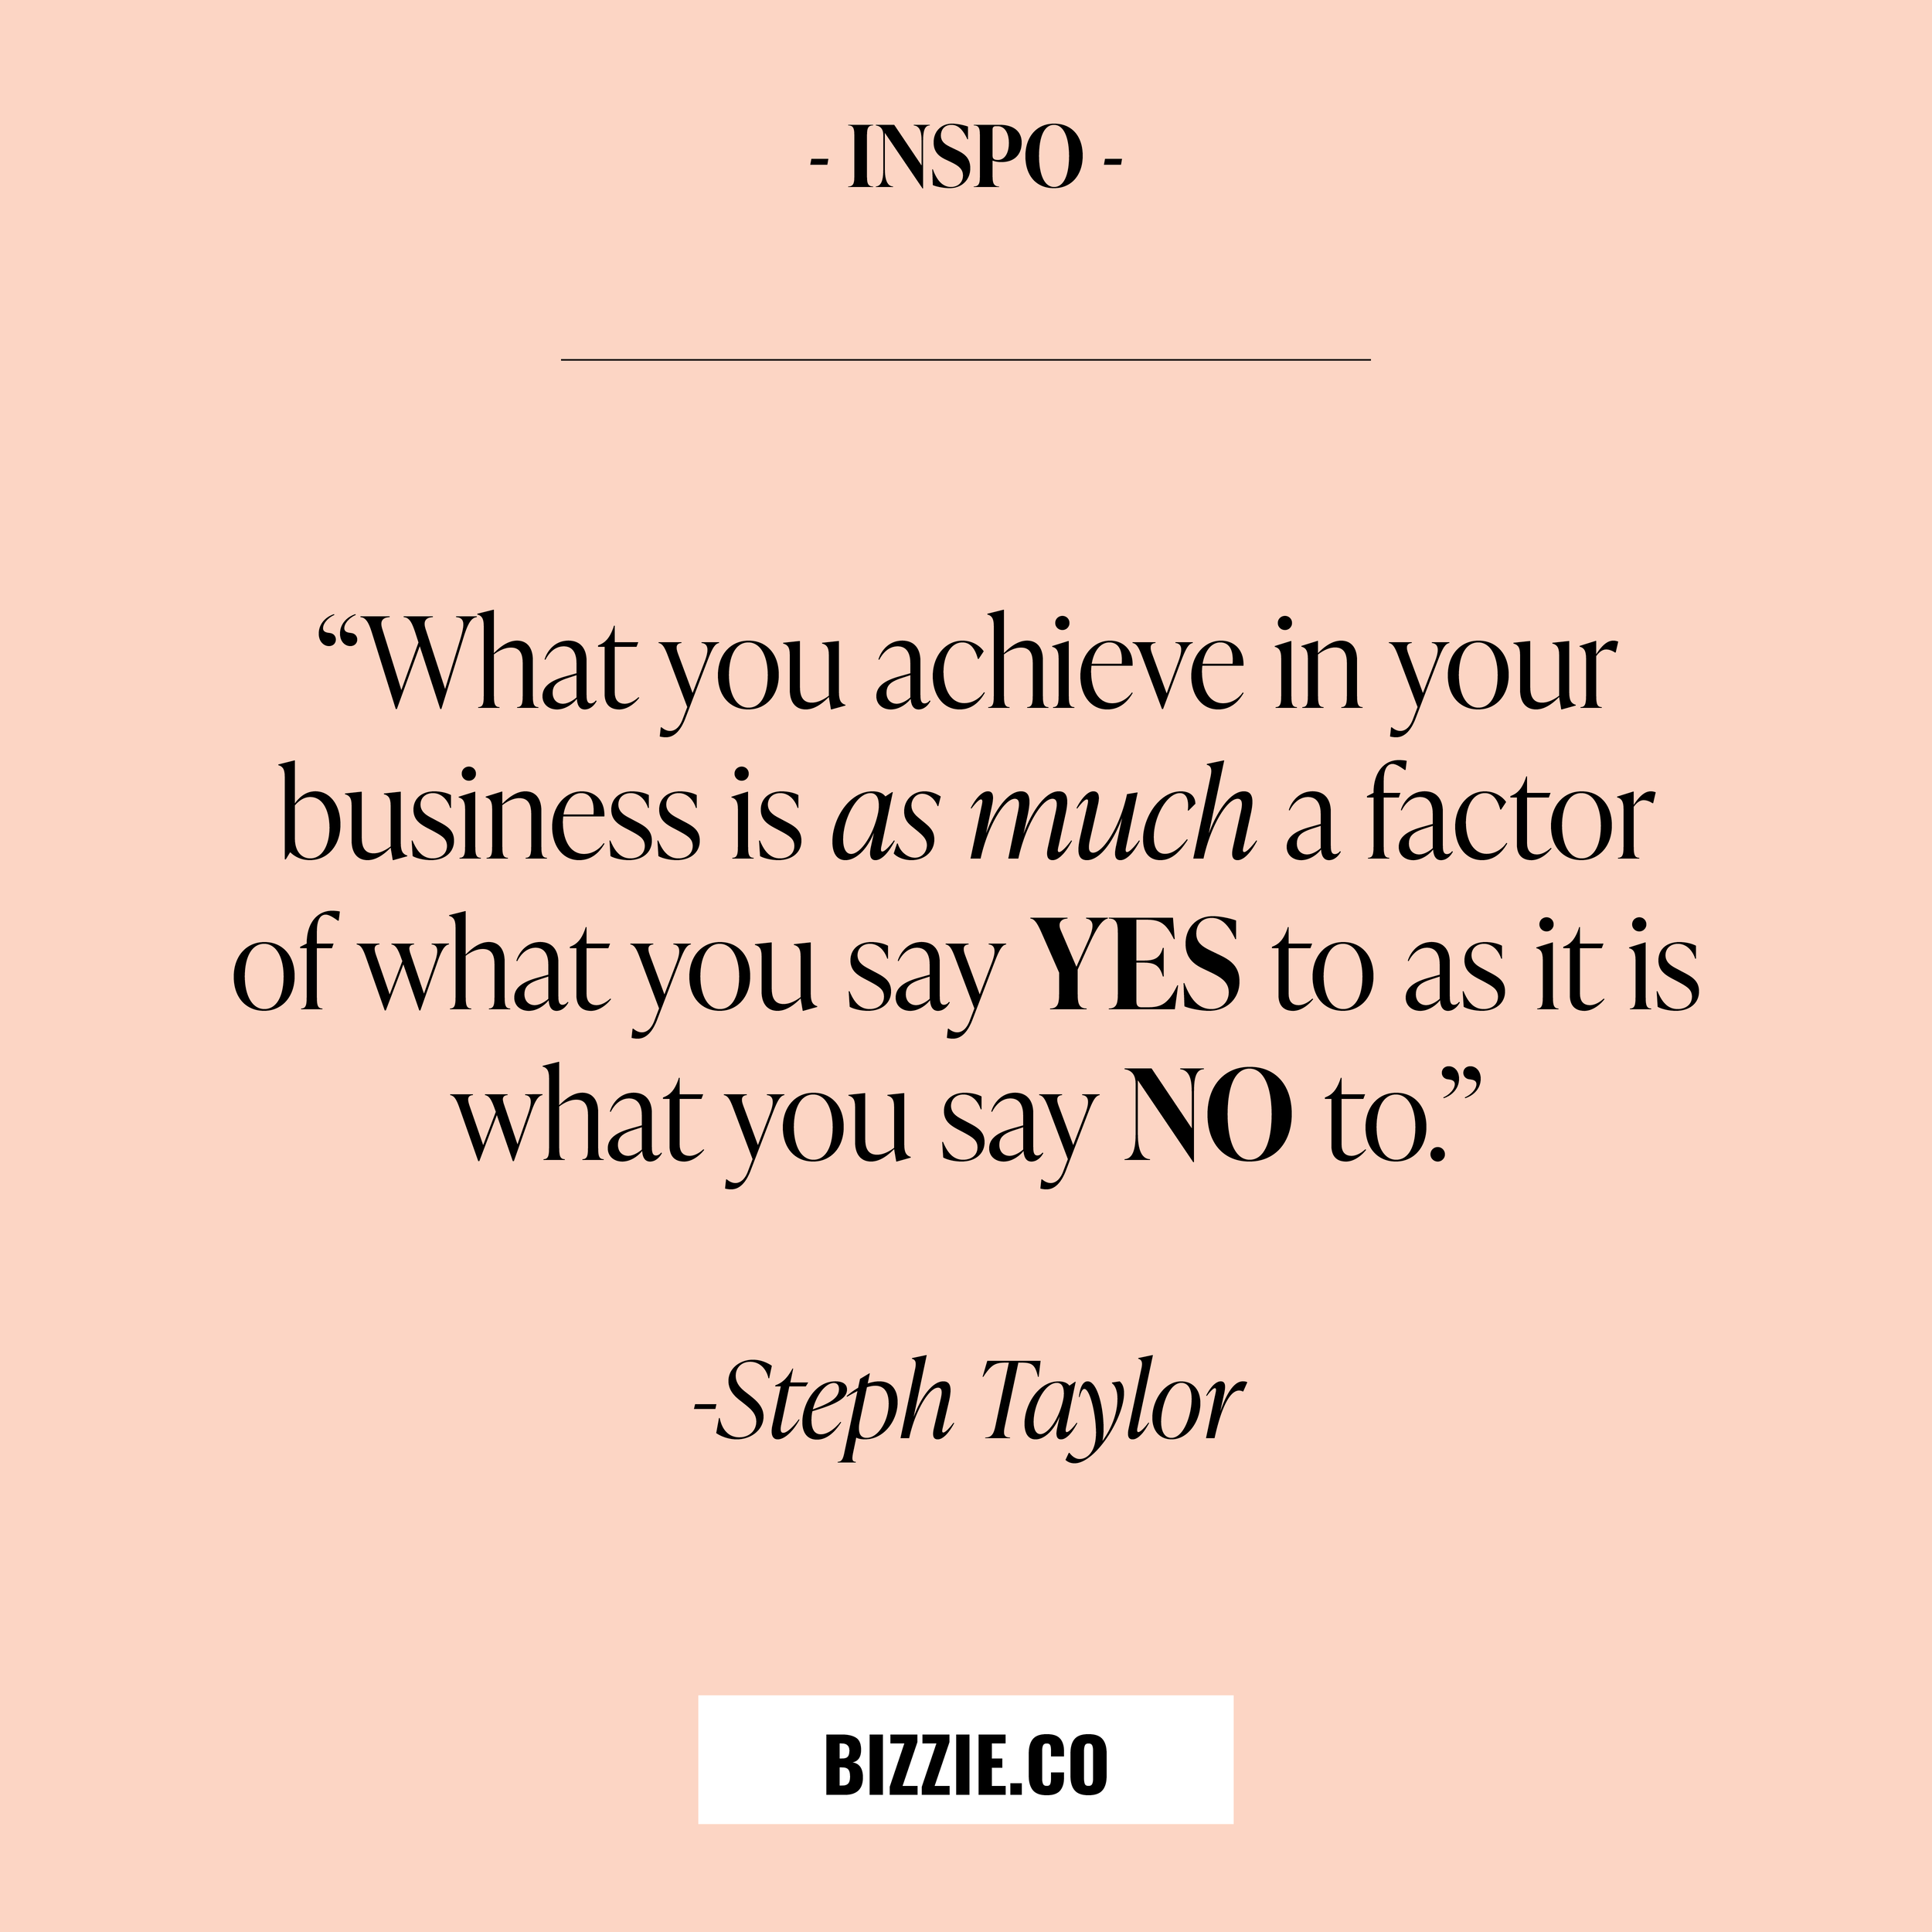 Steph Taylor quote.png